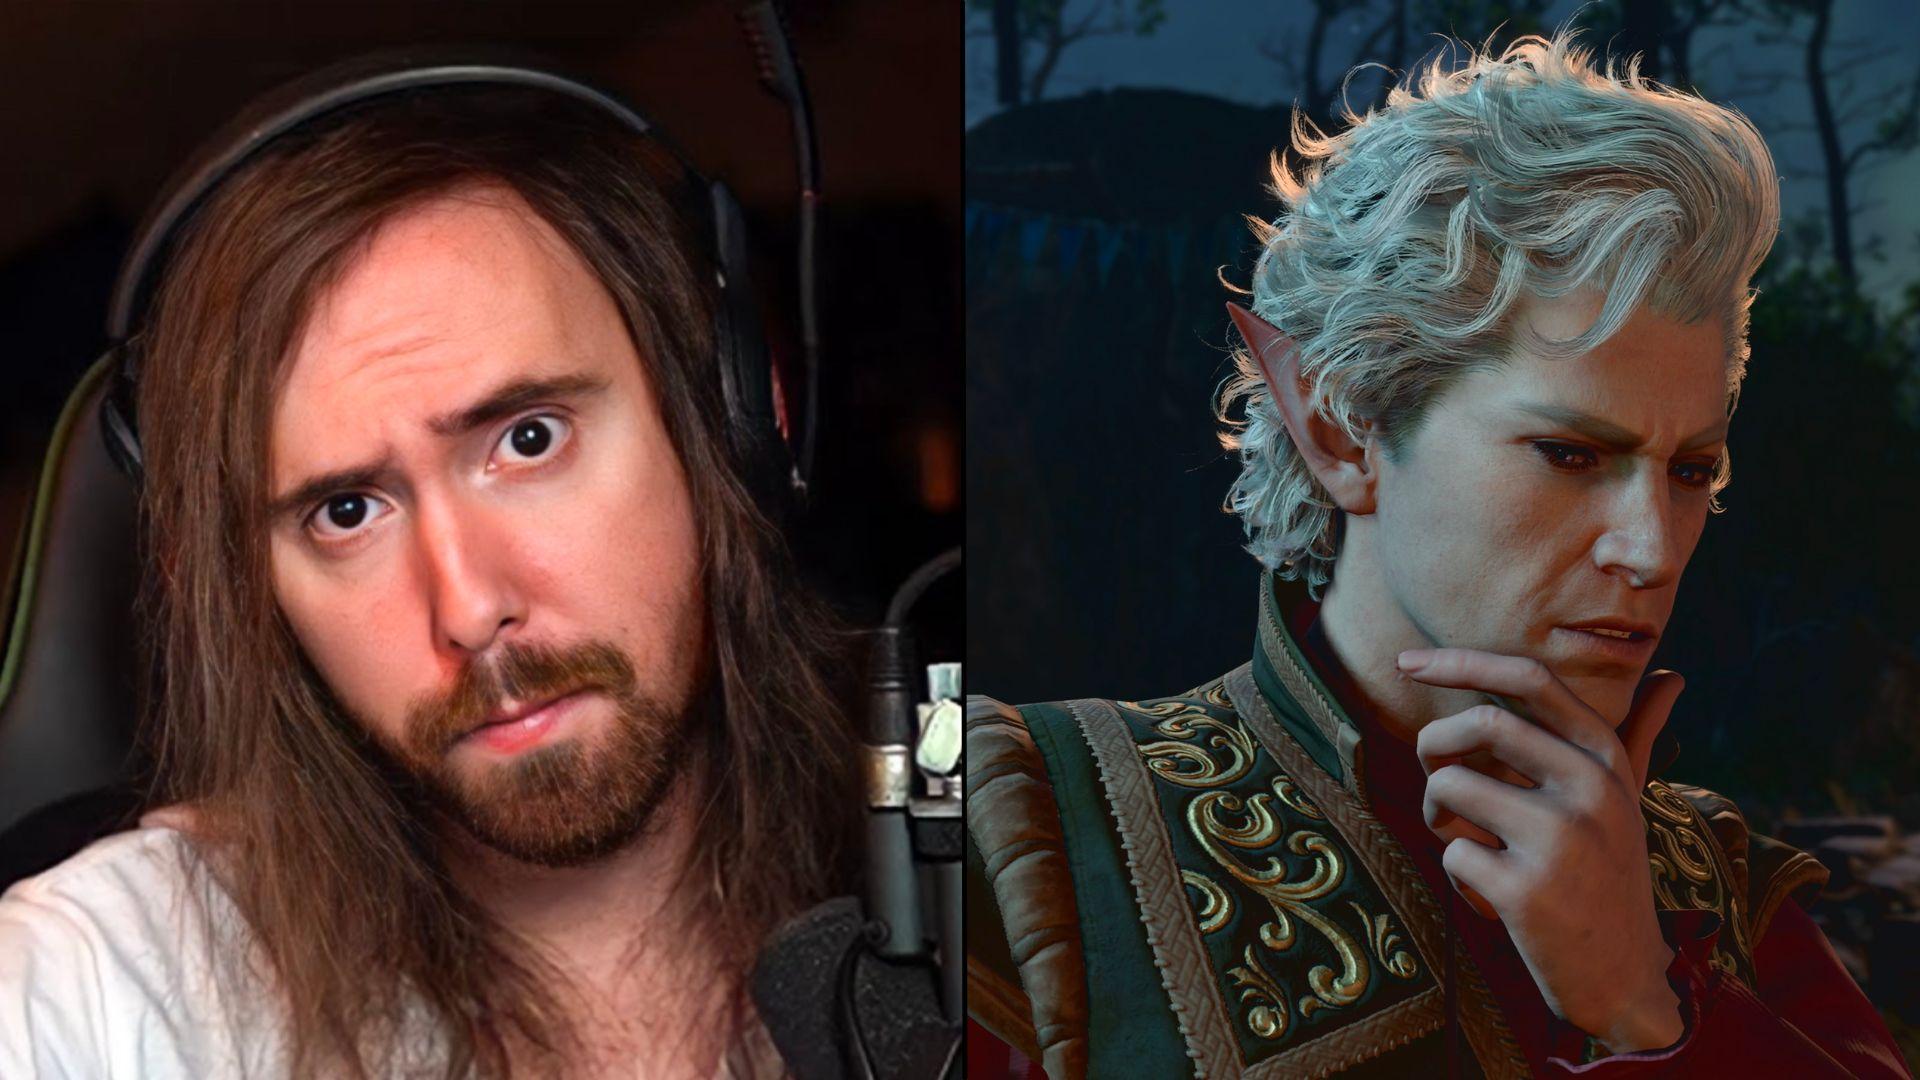 Asmongold side-by-side with Baldur's Gate 3 male character